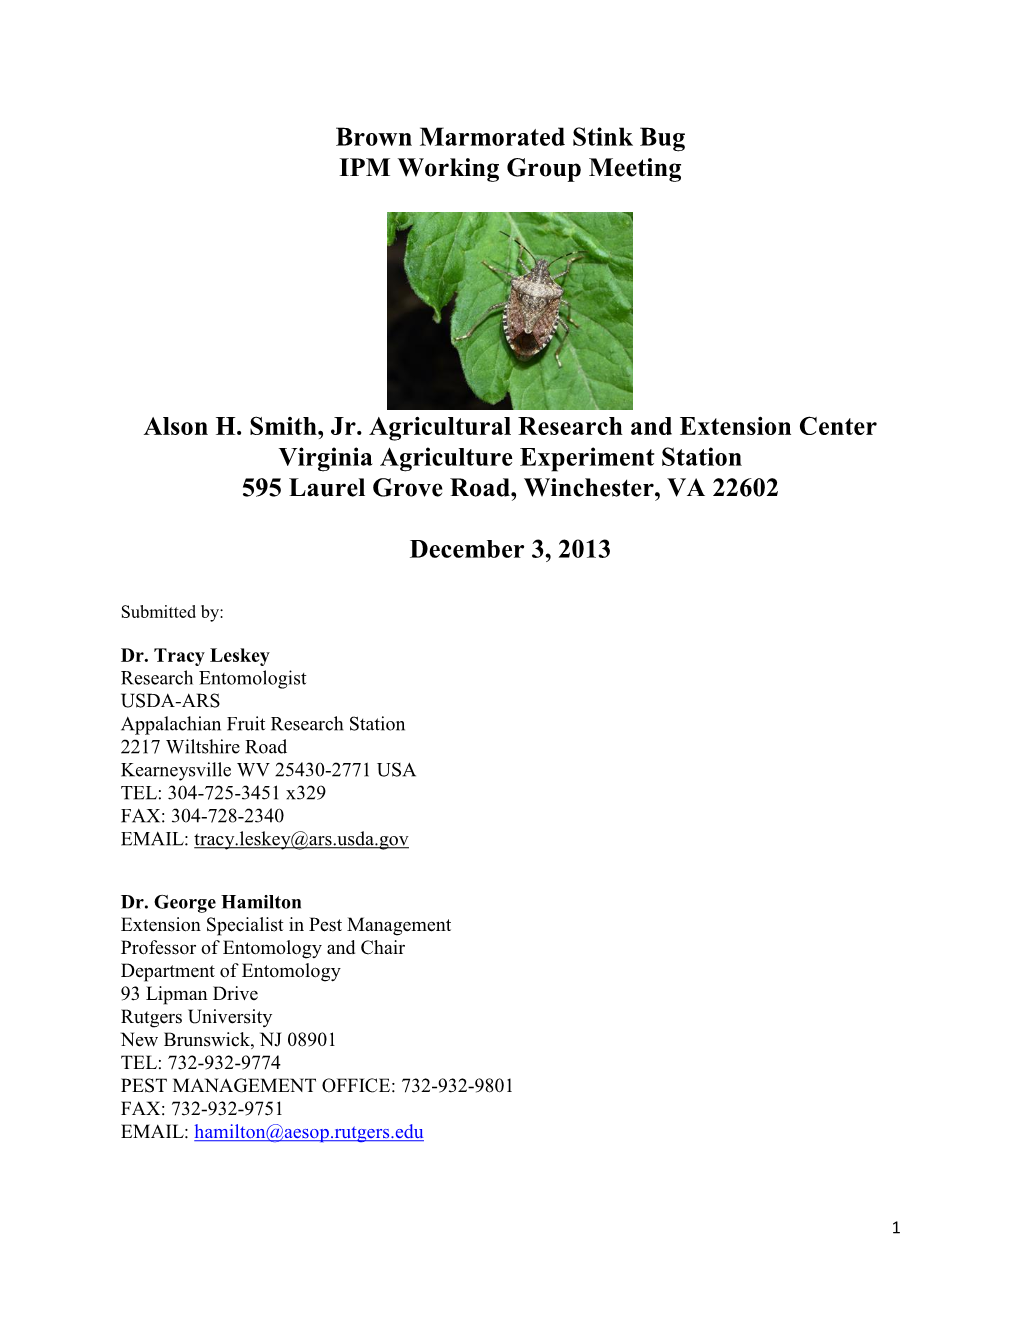 Brown Marmorated Stink Bug IPM Working Group Meeting